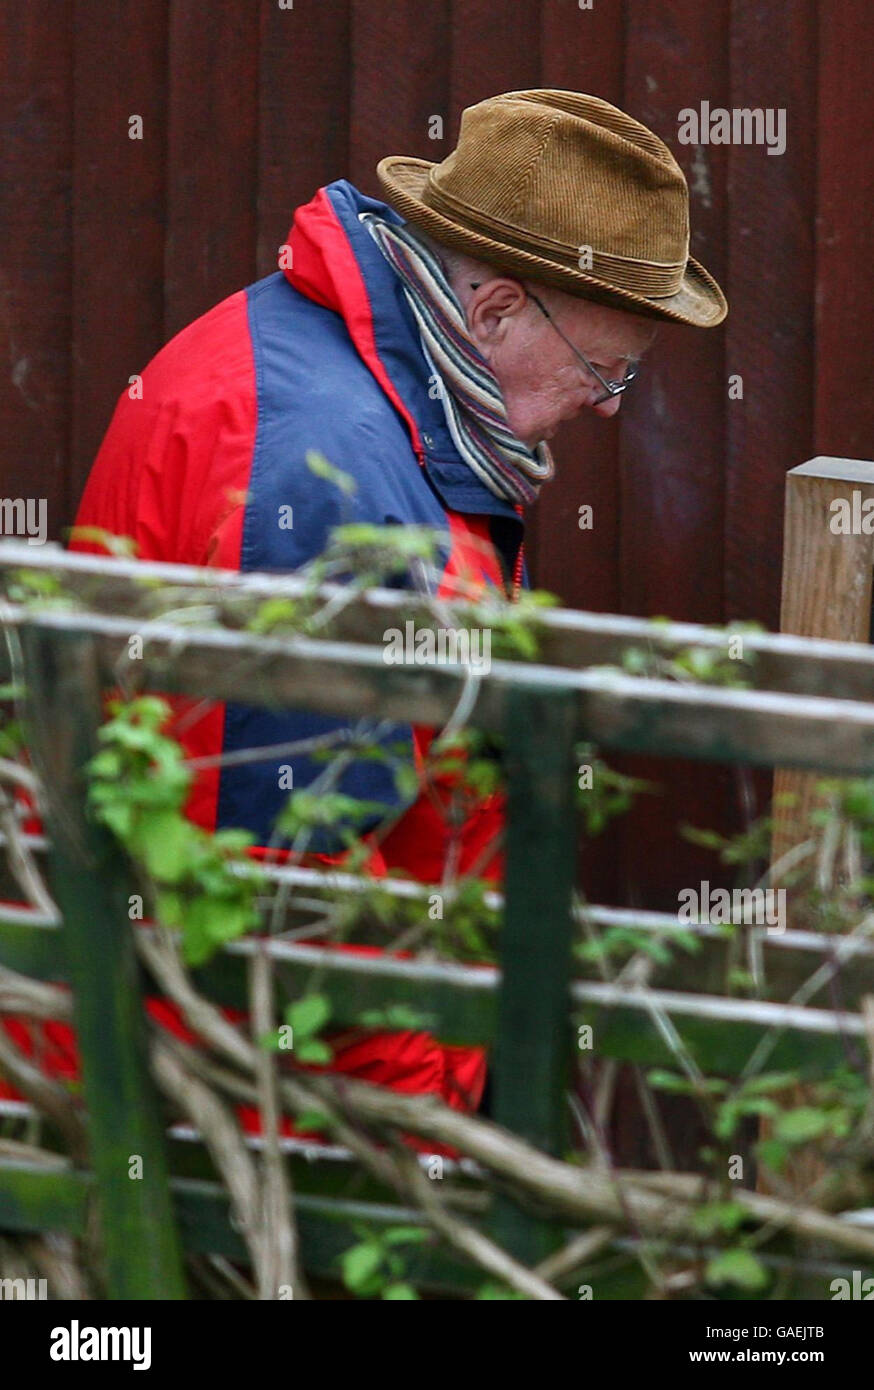 Ian McNicol father of Dinah McNicol visits the scene in the back garden at the former home of Peter Tobin in Margate, Kent, where the body of Dinah is thought to have been found. Stock Photo